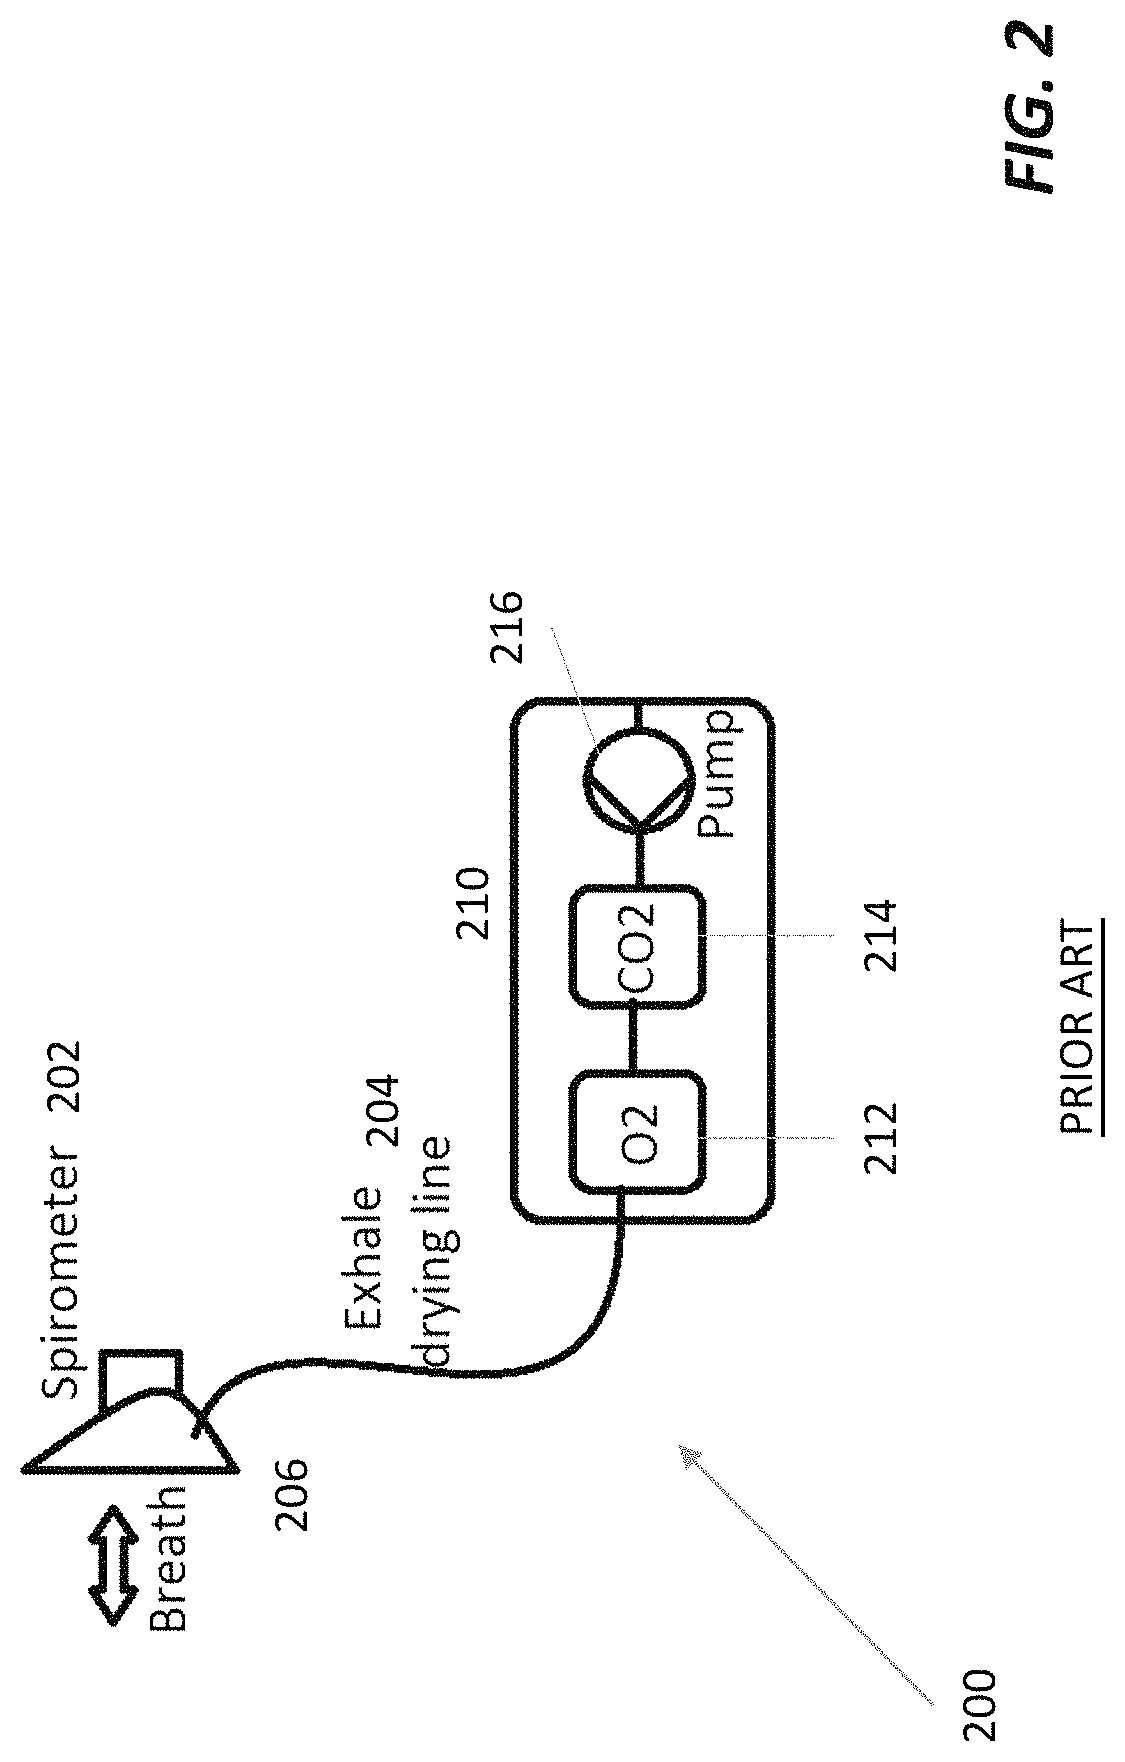 Methods and apparatus for passive, proportional, valveless gas sampling and delivery